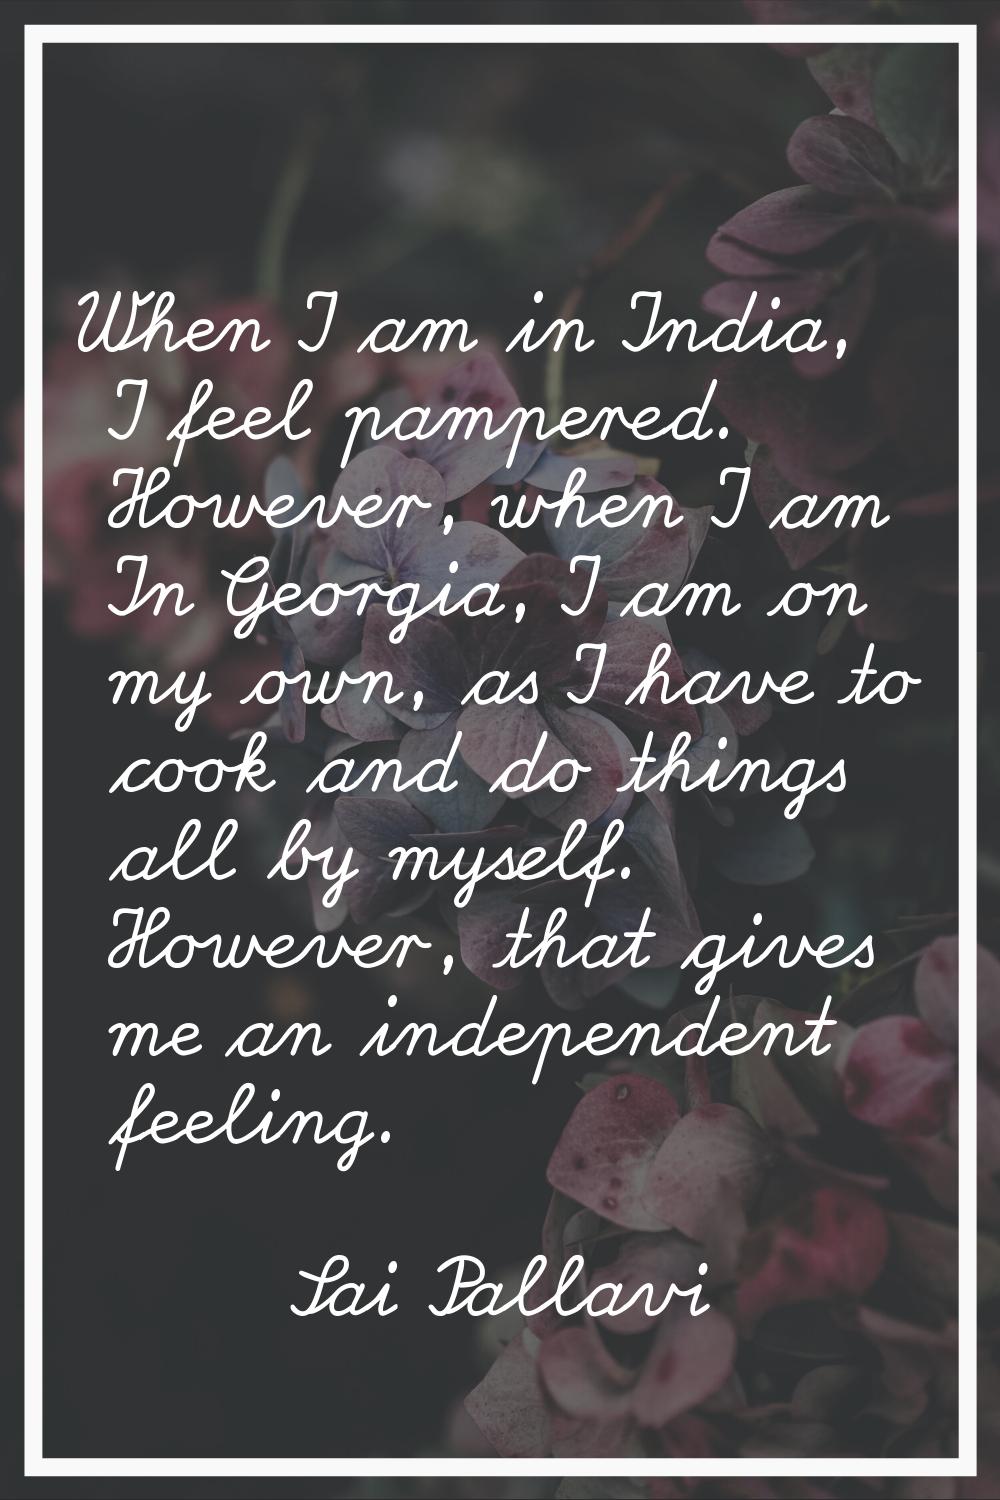 When I am in India, I feel pampered. However, when I am In Georgia, I am on my own, as I have to co